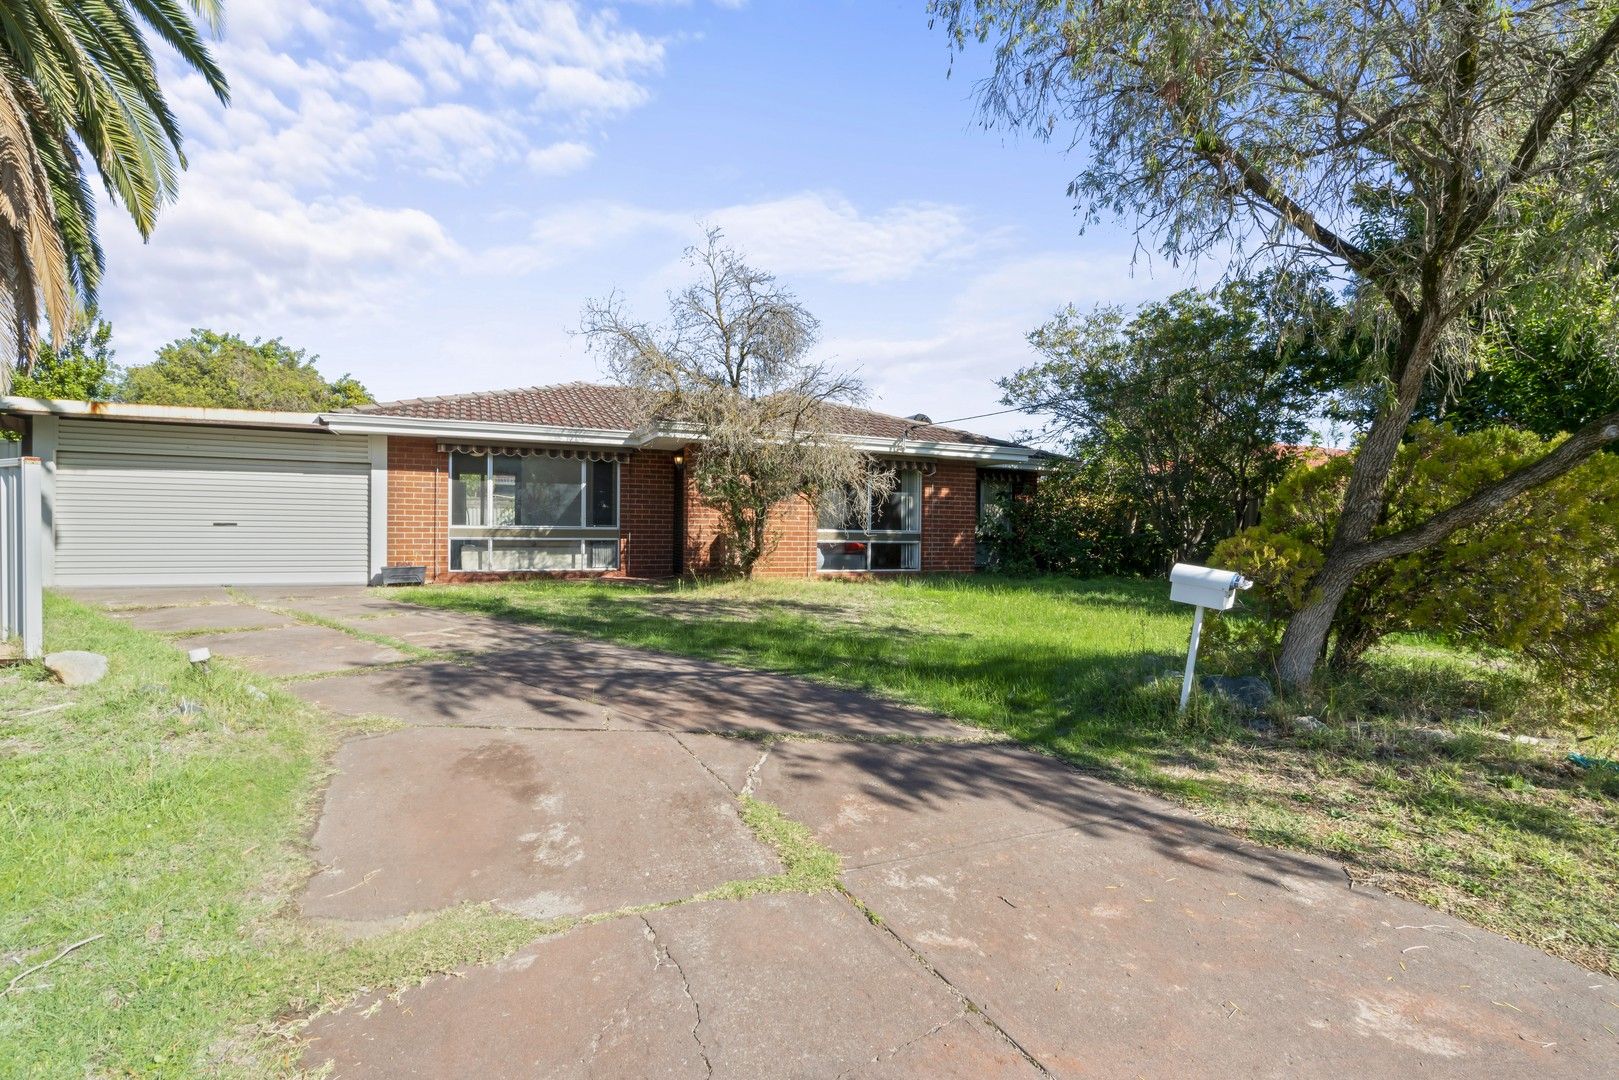 3 bedrooms House in 7 Ivers Court LANGFORD WA, 6147